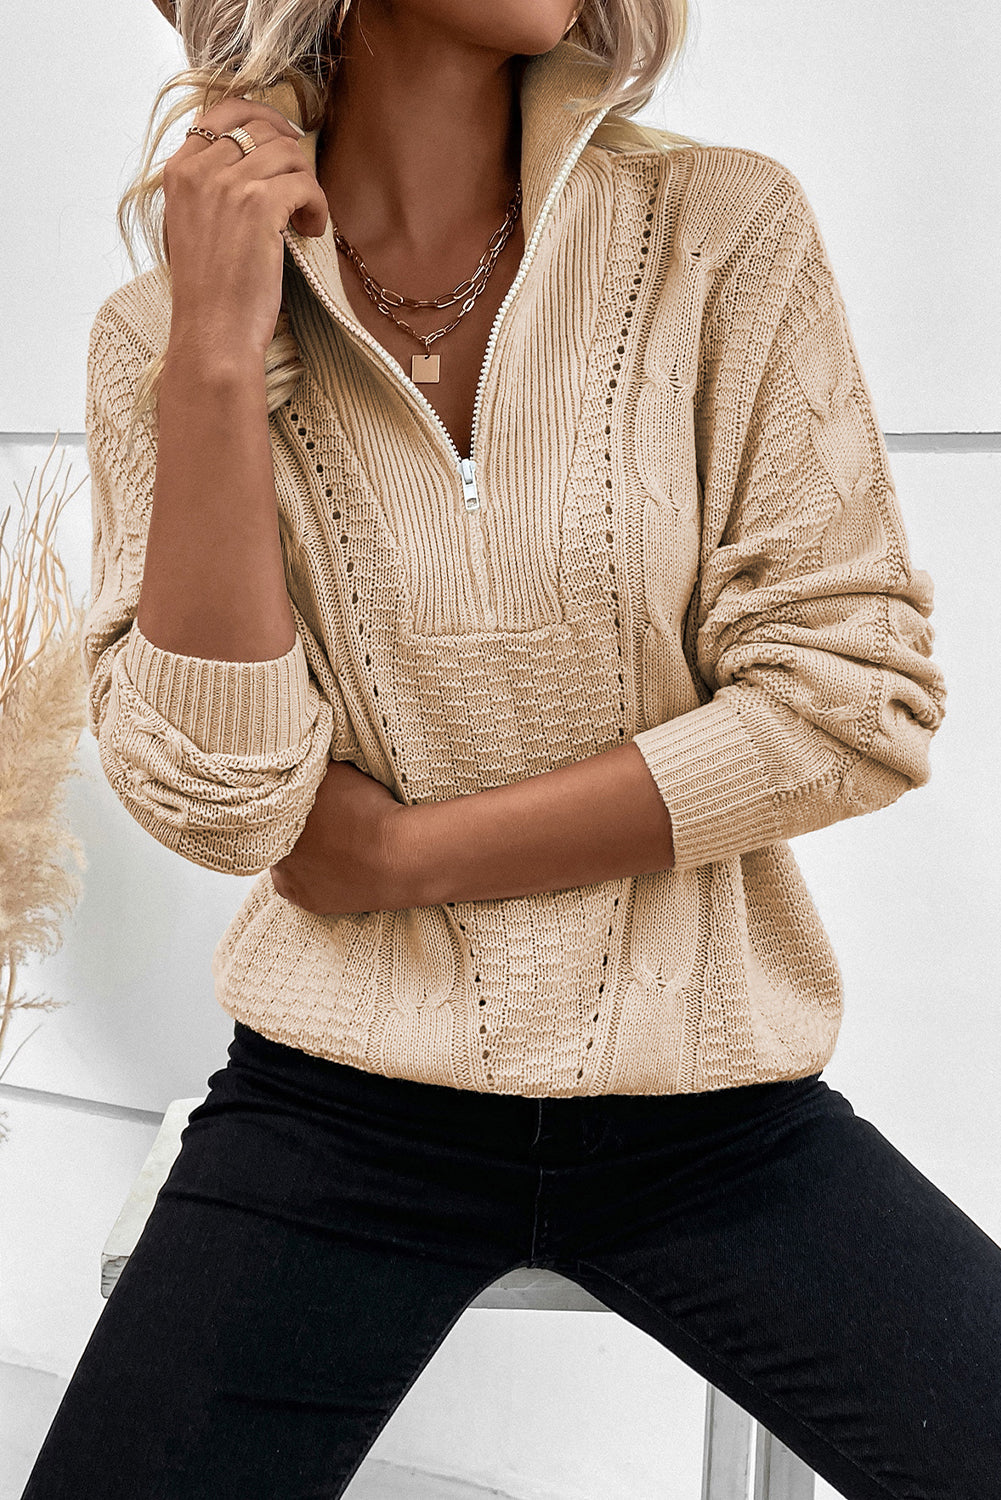 Apricot Zipped Stand Collar Cable Knit Sweater